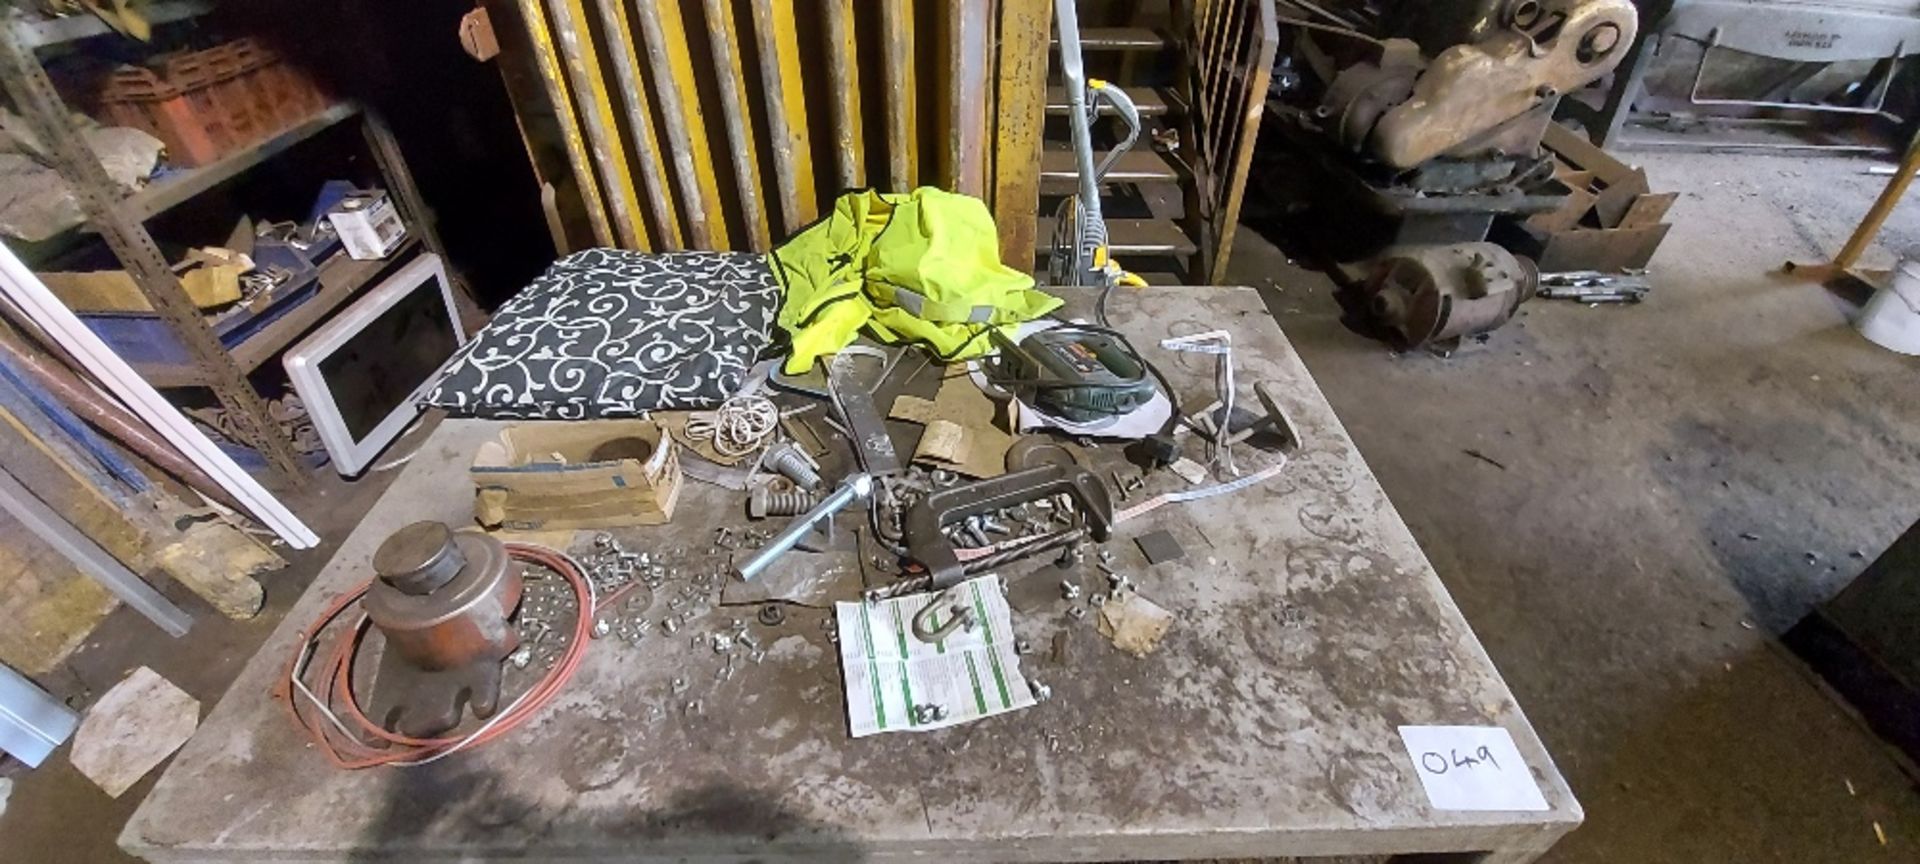 Mobile Workbench with Contents - Image 2 of 4